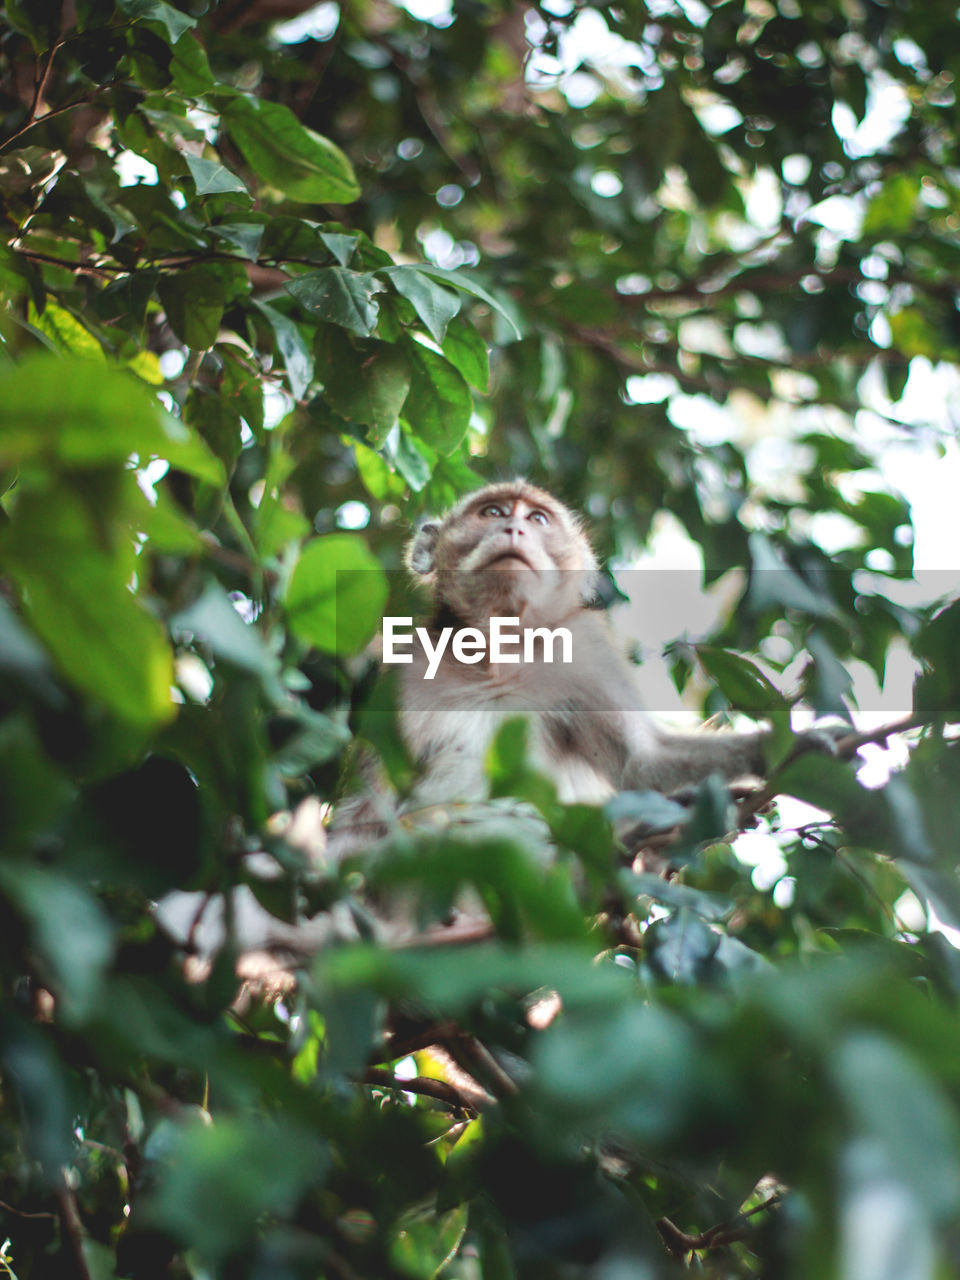 low angle view of monkey sitting on tree